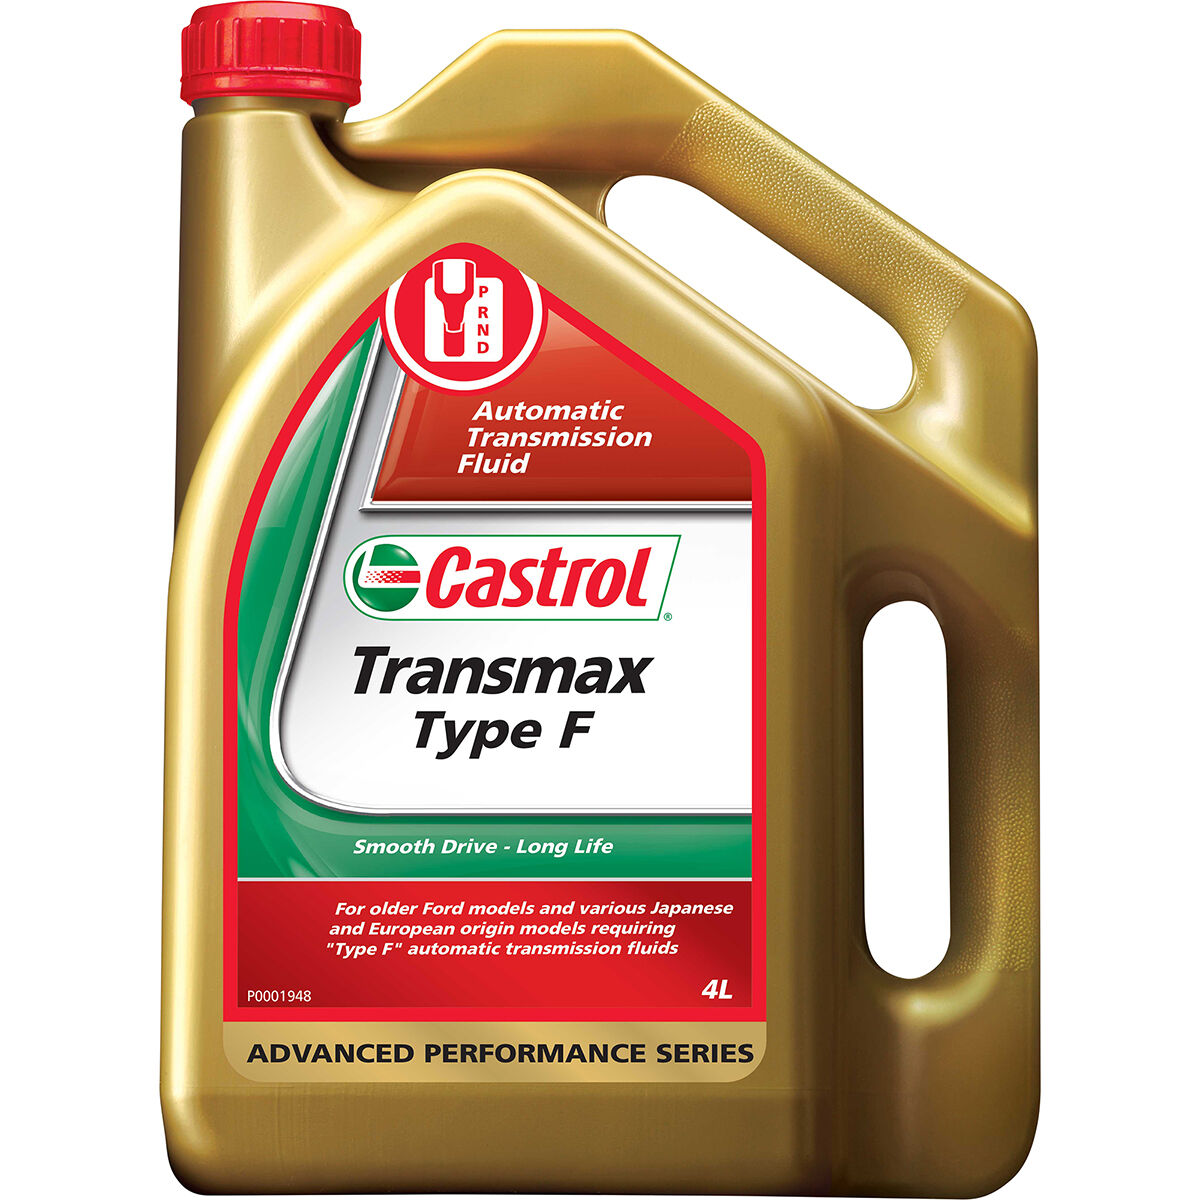 replace transmission fluid cost